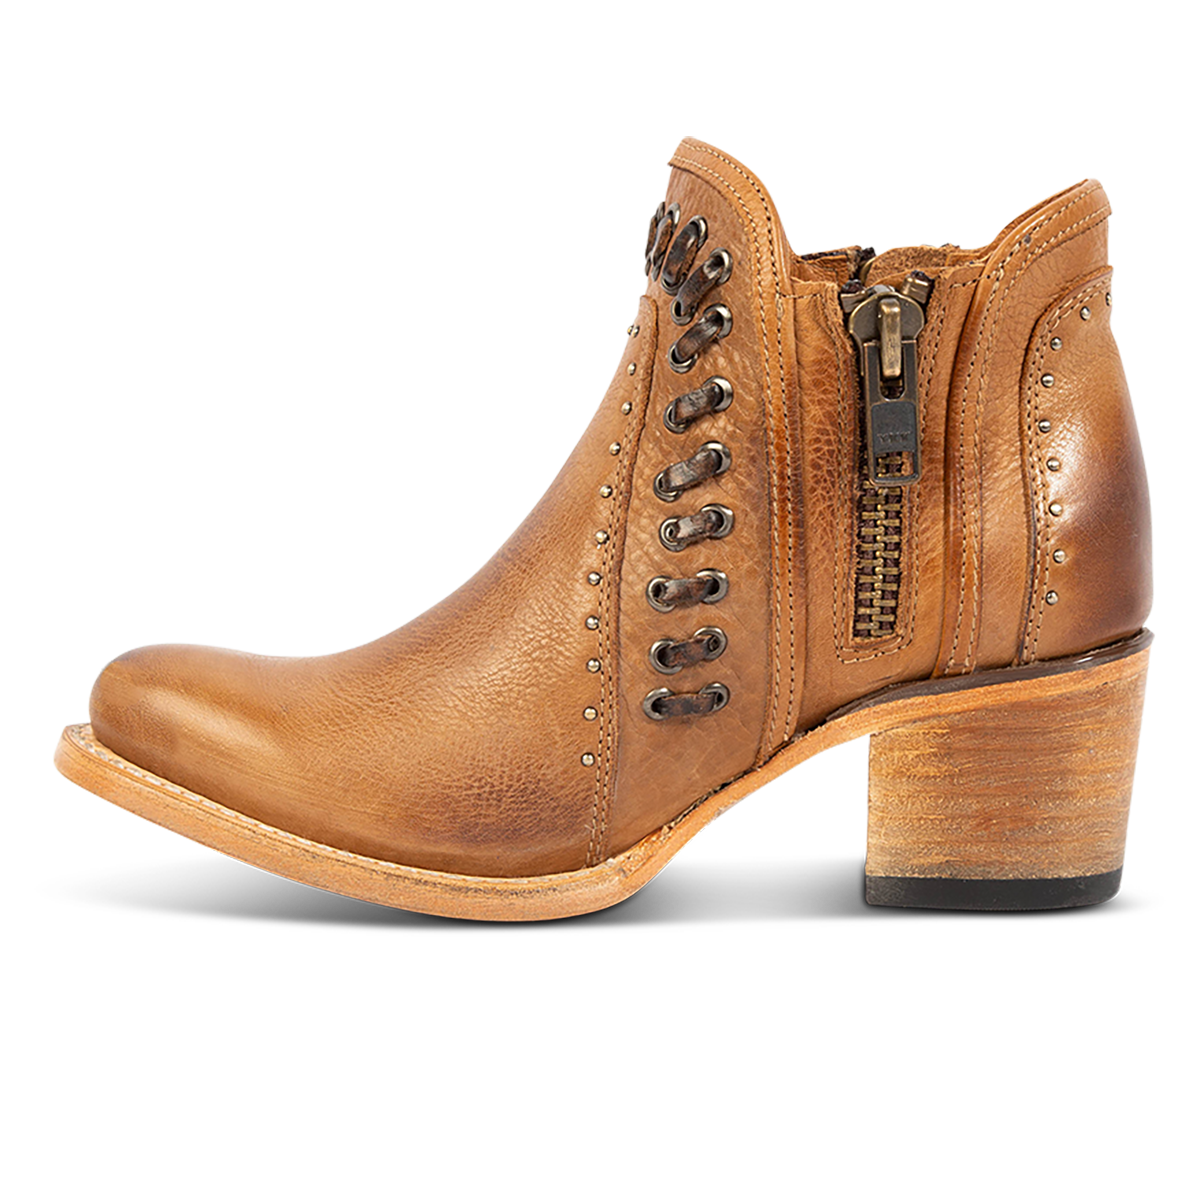 Inside view showing women's Ryder wheat leather bootie with inside zip closures, eyelet whip stitch leather detailing and an almond toe.